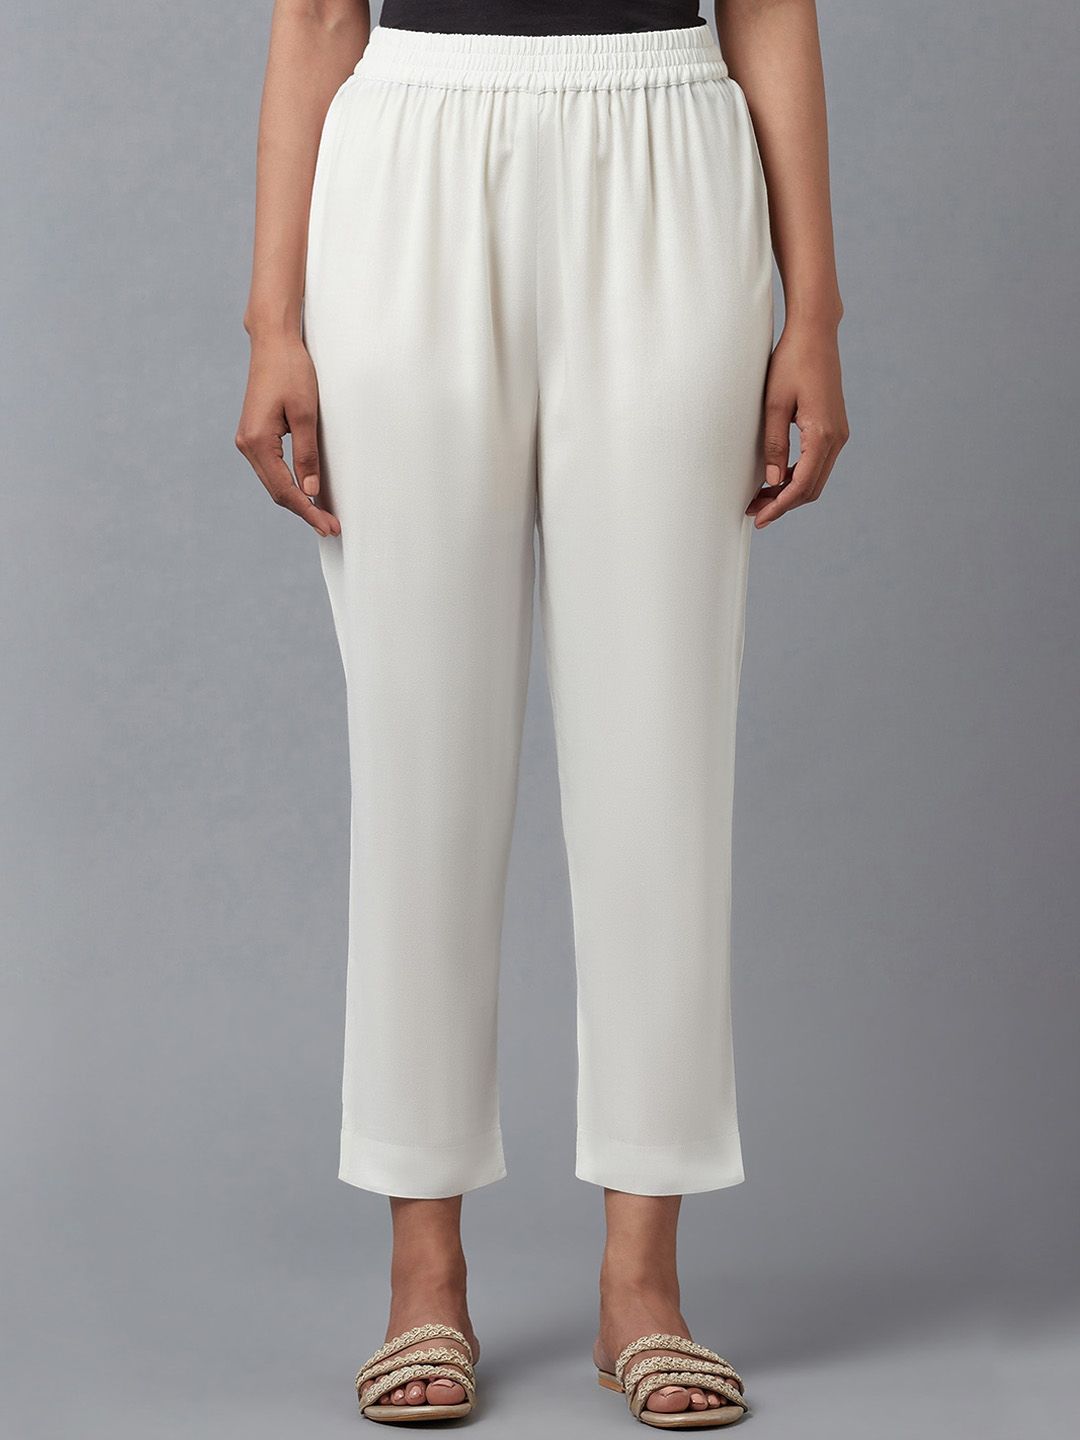 W Women White Trousers Price in India